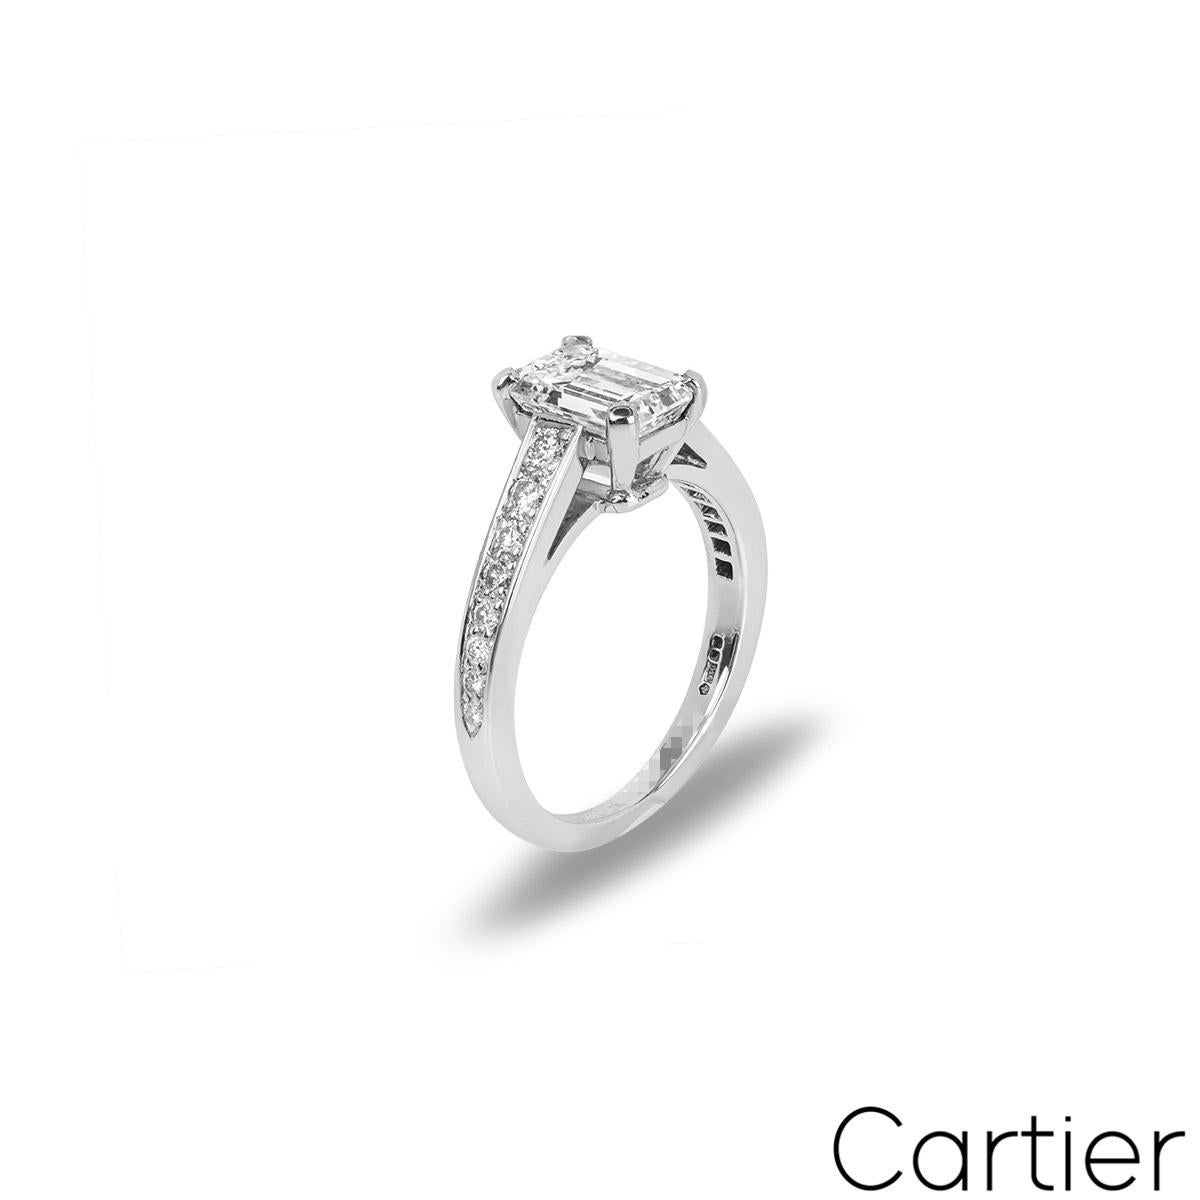 A breathtaking platinum diamond ring by Cartier from the Solitaire 1895 collection. The ring features an emerald cut diamond set to the centre weighing 1.53ct, E colour and VS1 clarity. The engagement ring tapers down from 3mm to 2mm and is pave set